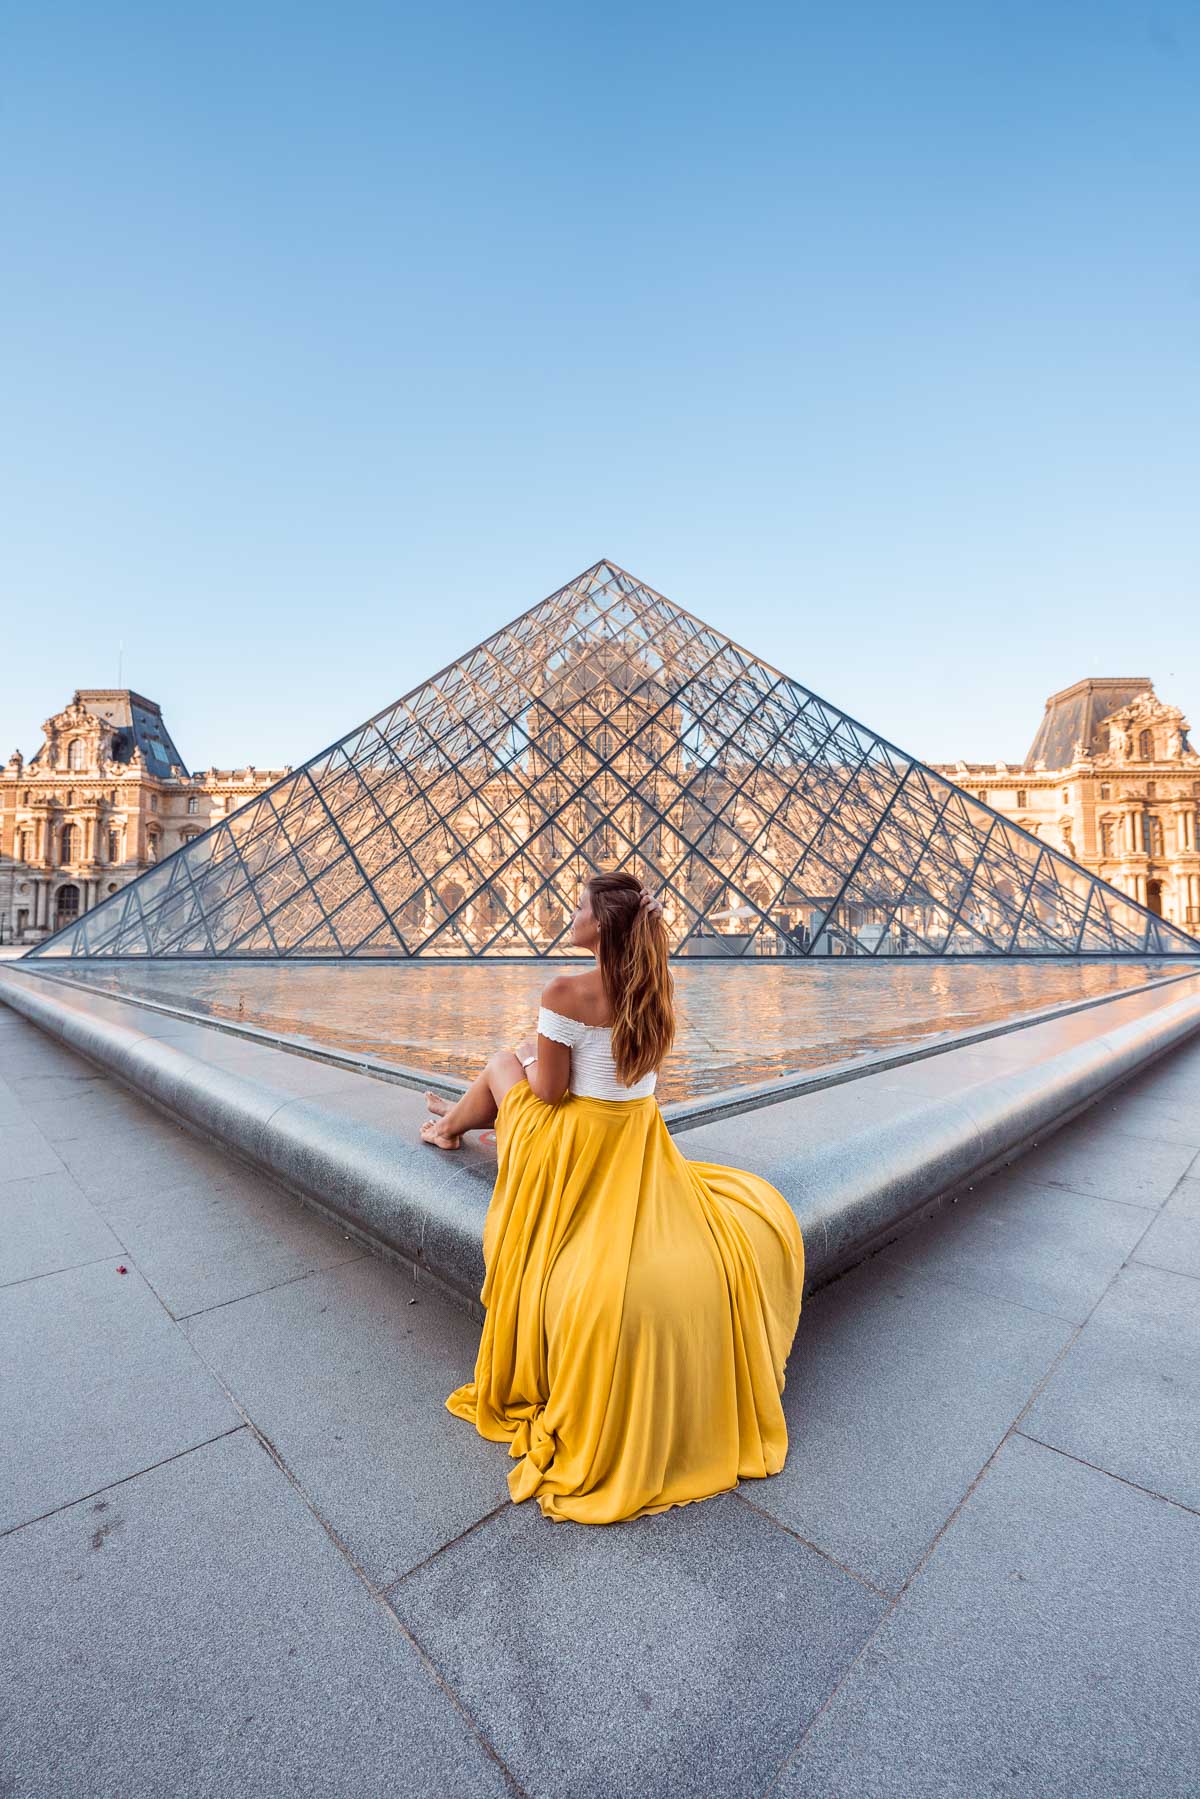 Girl in a yellow skirt sitting in front of one of the pyramids at the Louvre, one of the most Instagrammable places in Paris